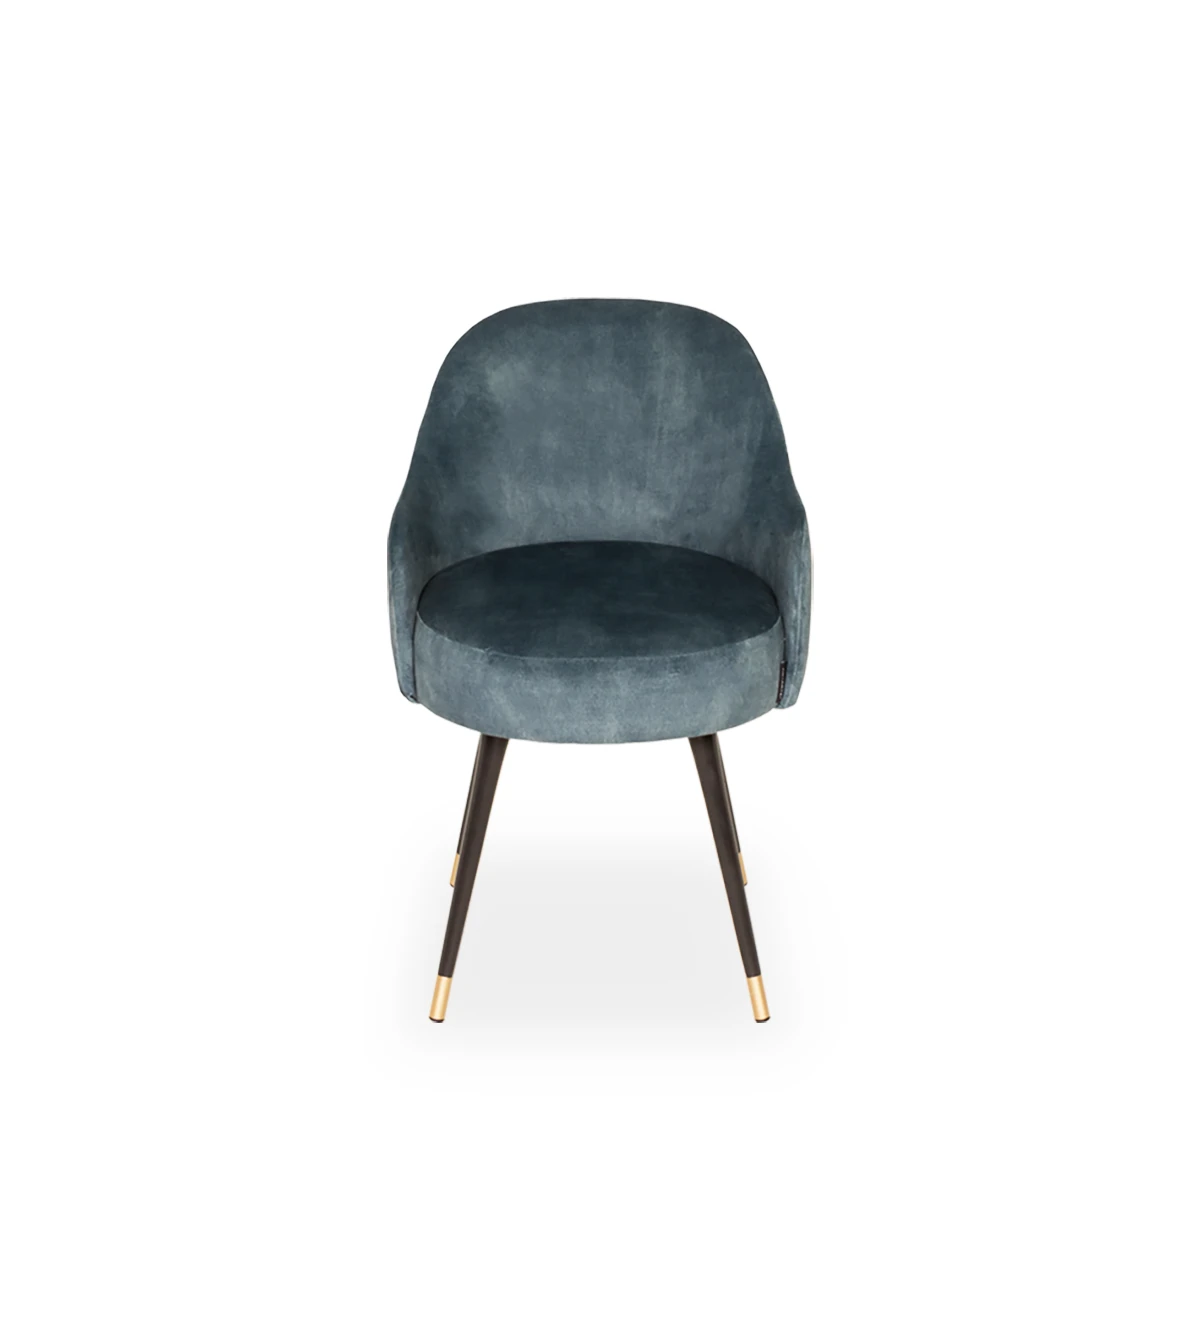 Fabric upholstered swivel chair with black lacquered legs and gold detailing.